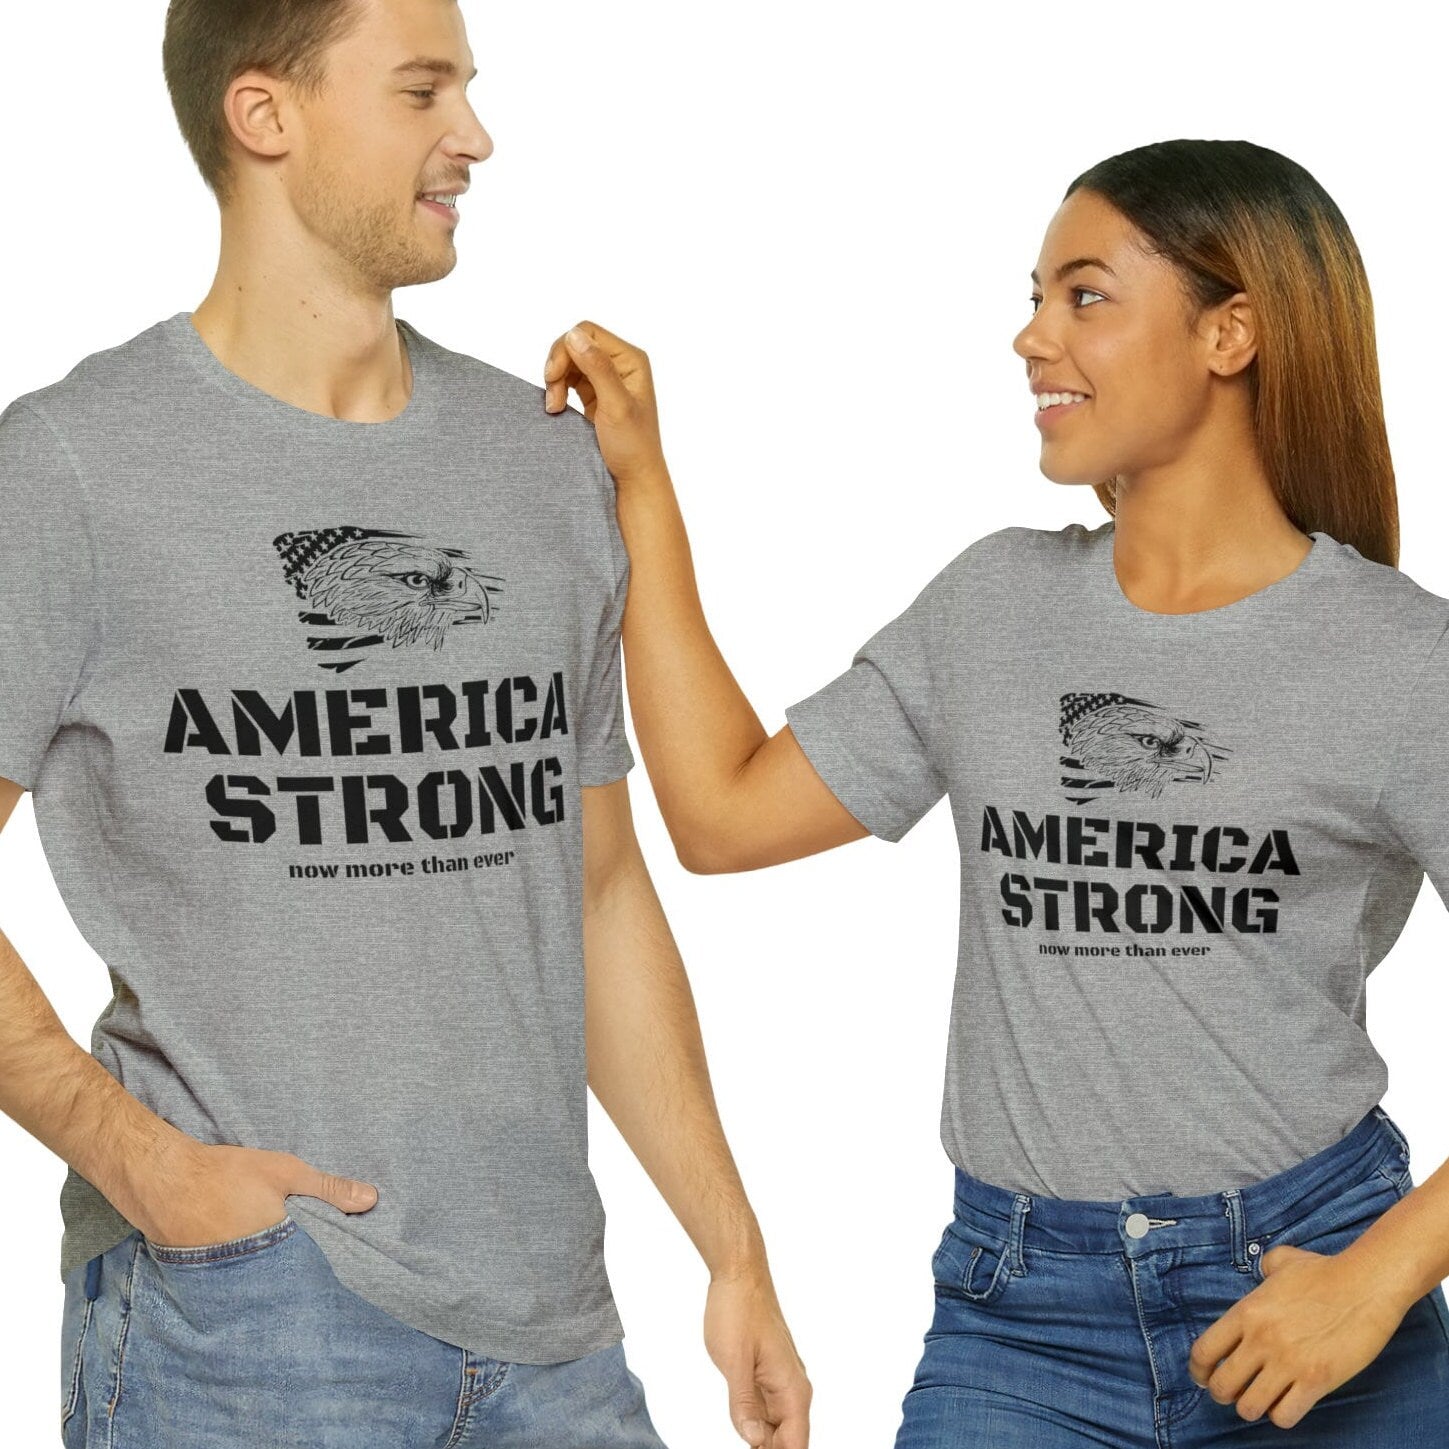 America Strong Now More Than Ever Unisex T-Shirt